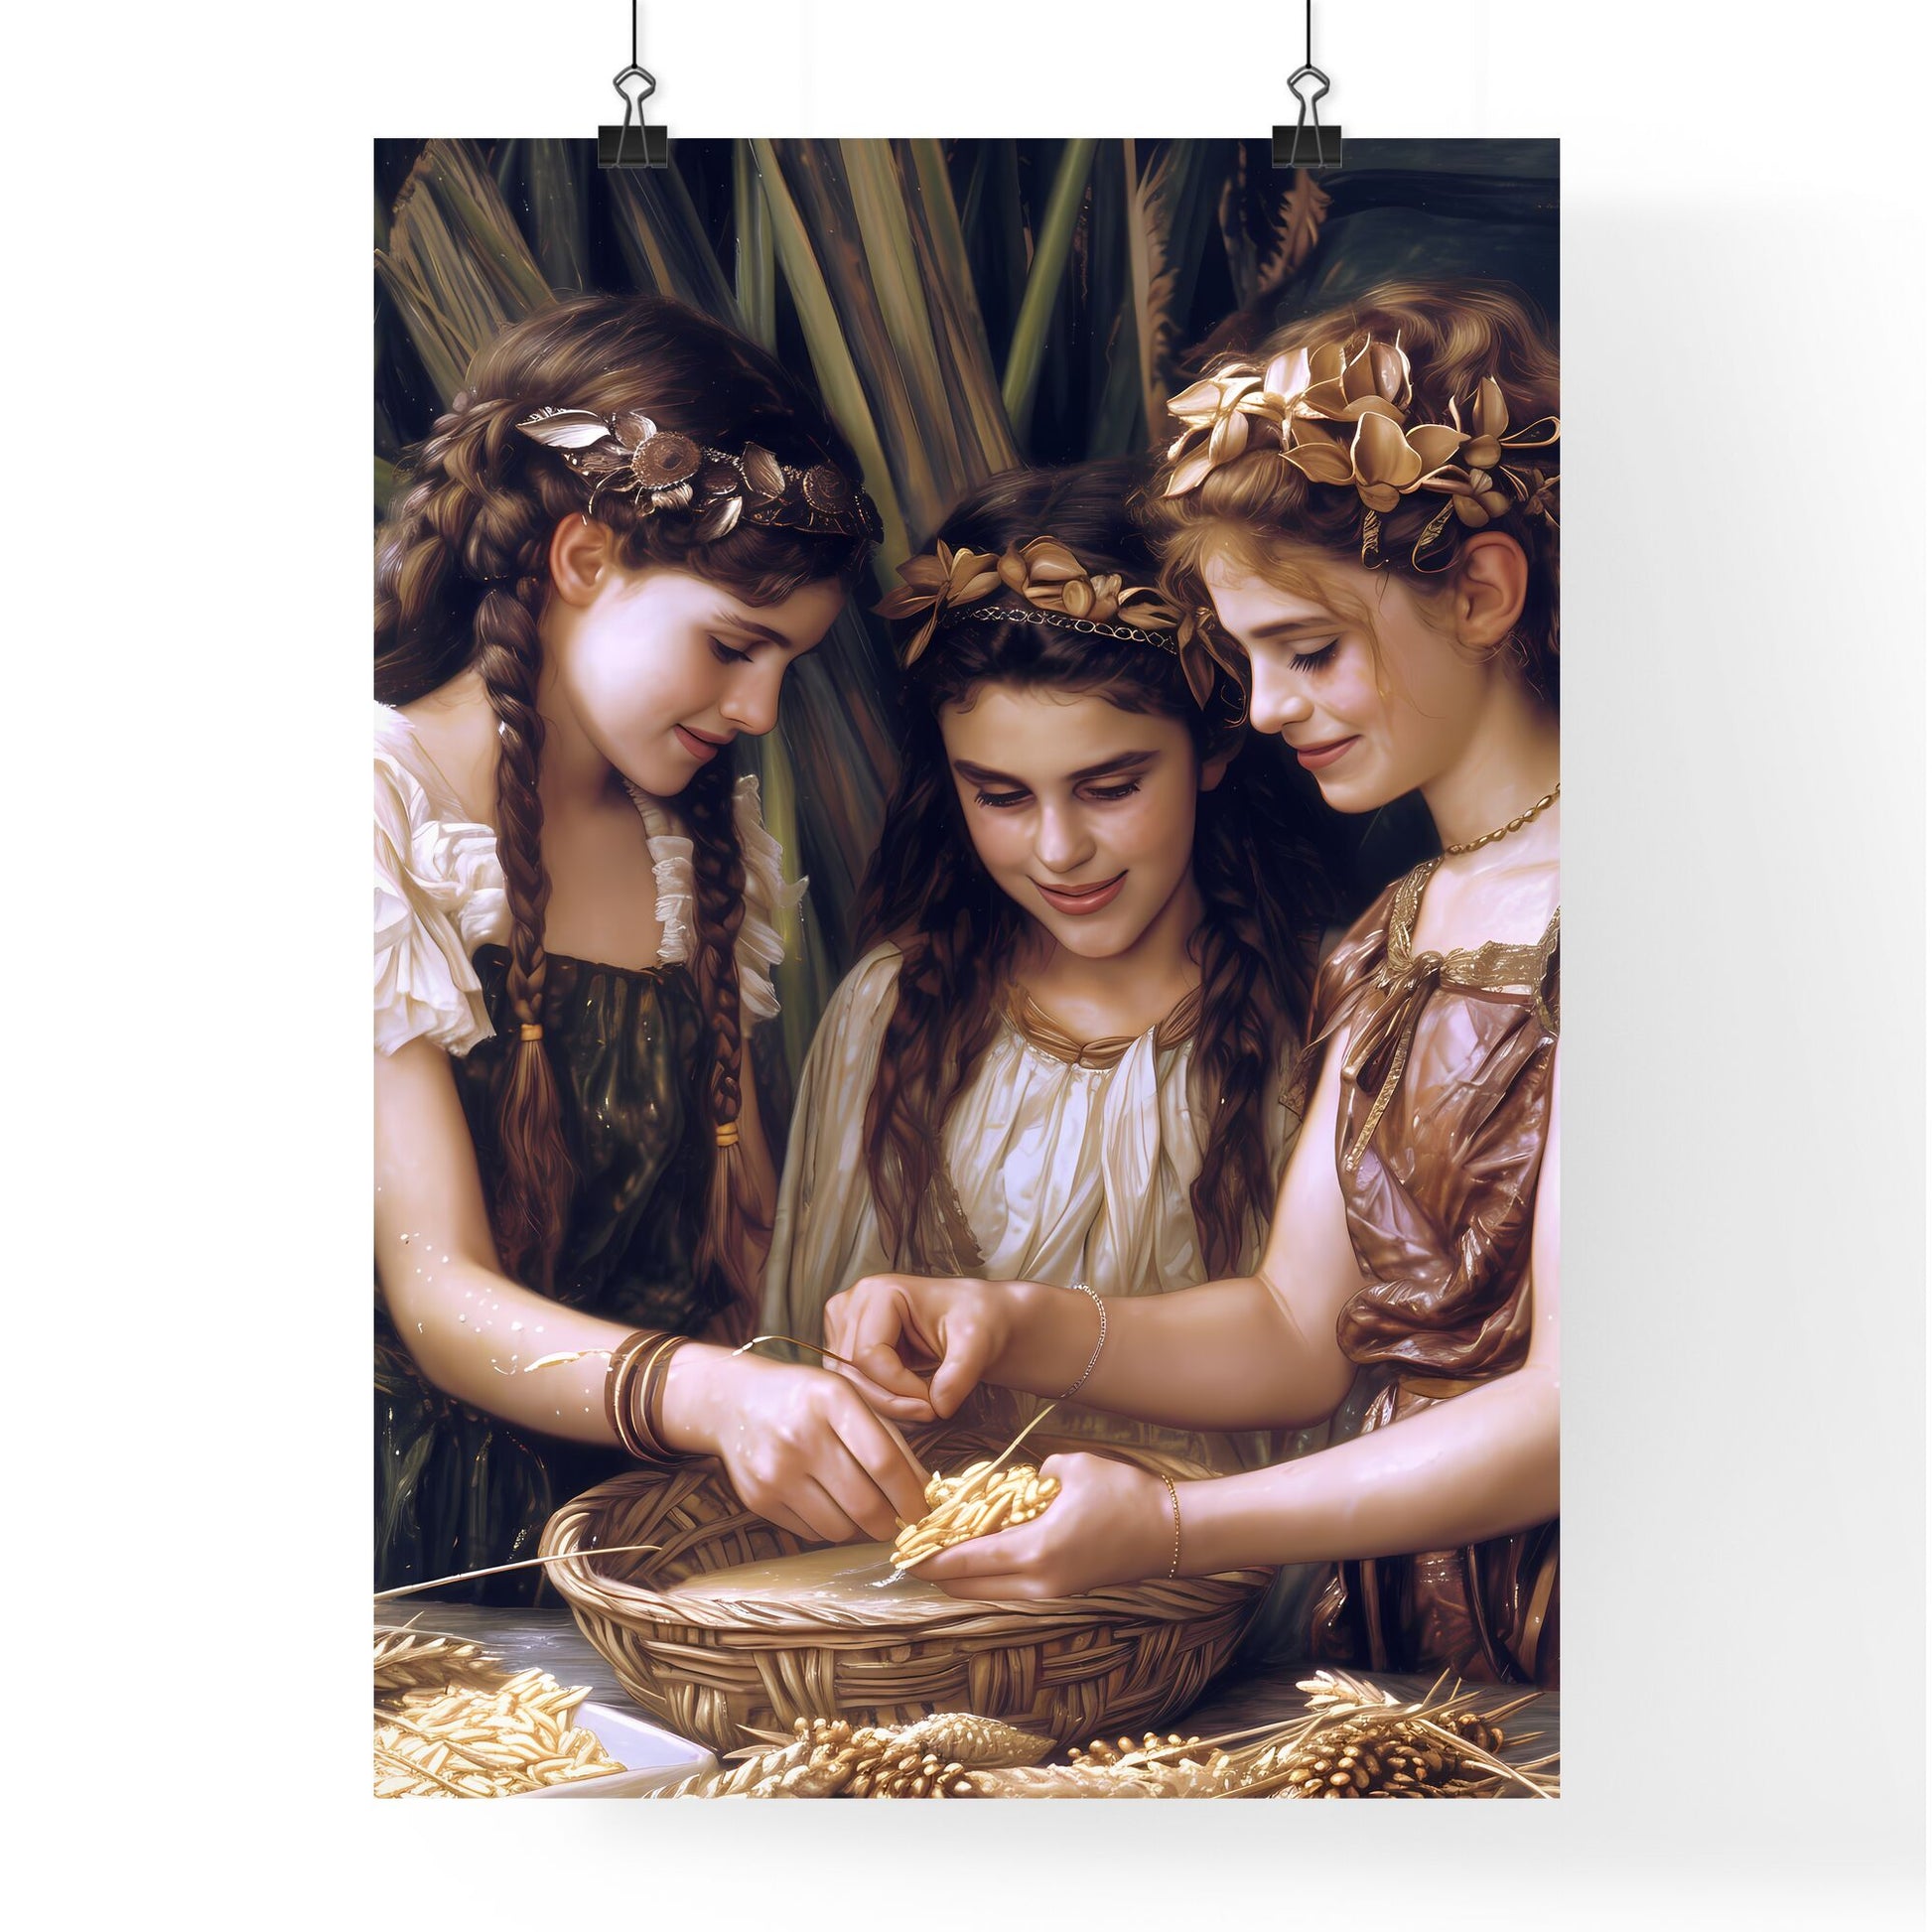 Lebanon country life in 2000 BC - Art print of a group of girls in clothing Default Title